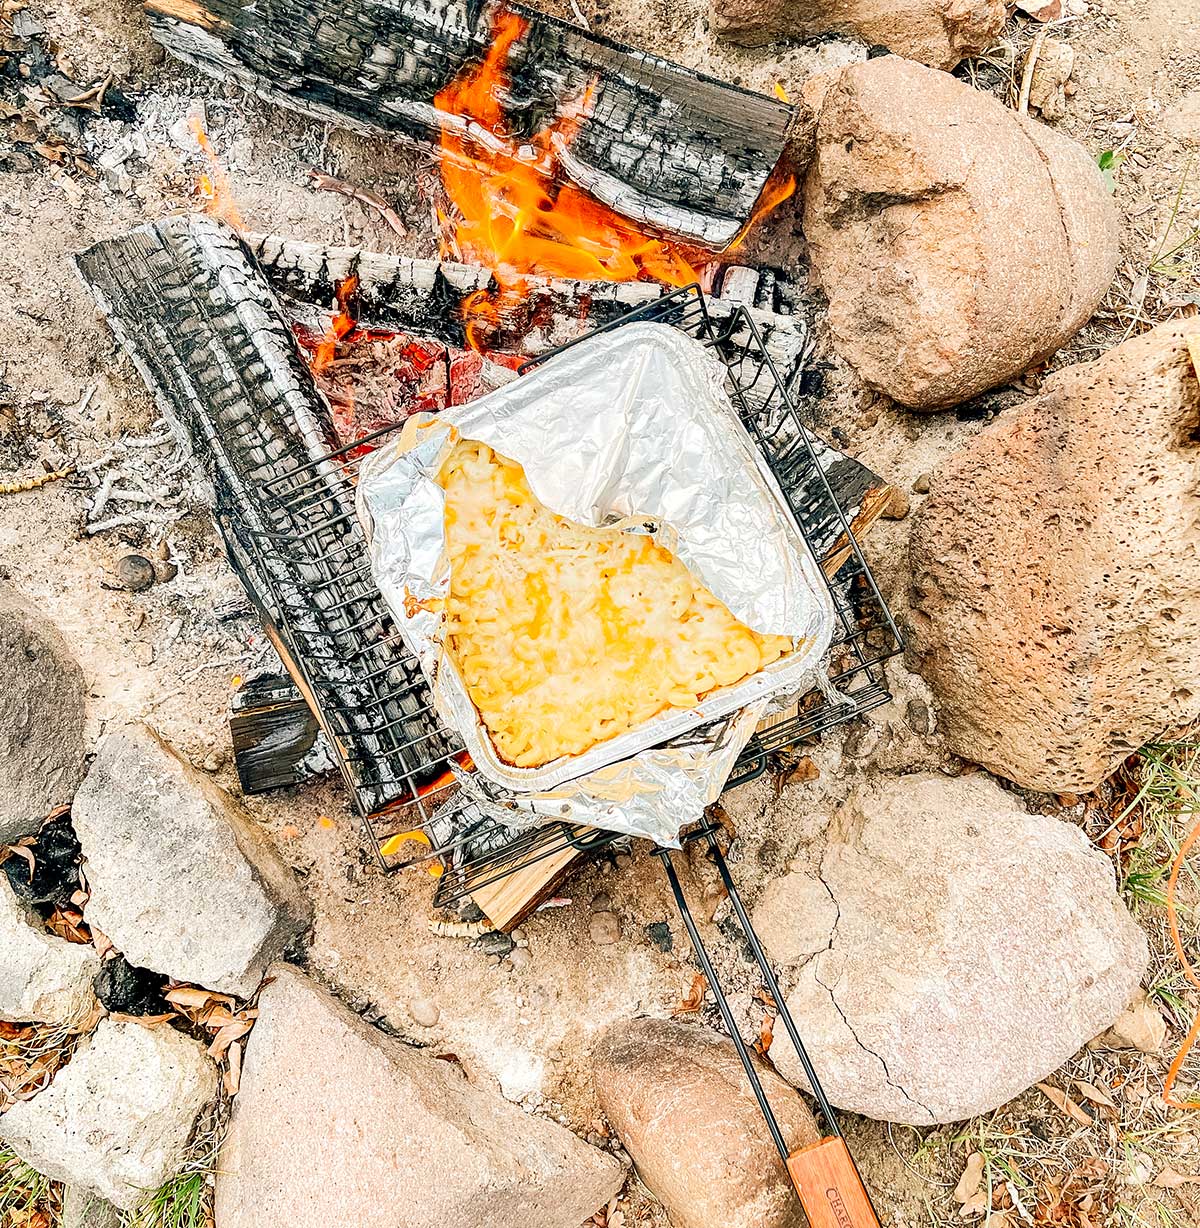 Cooking a disposable aluminum container of campfire mac n cheese on logs over a campfire